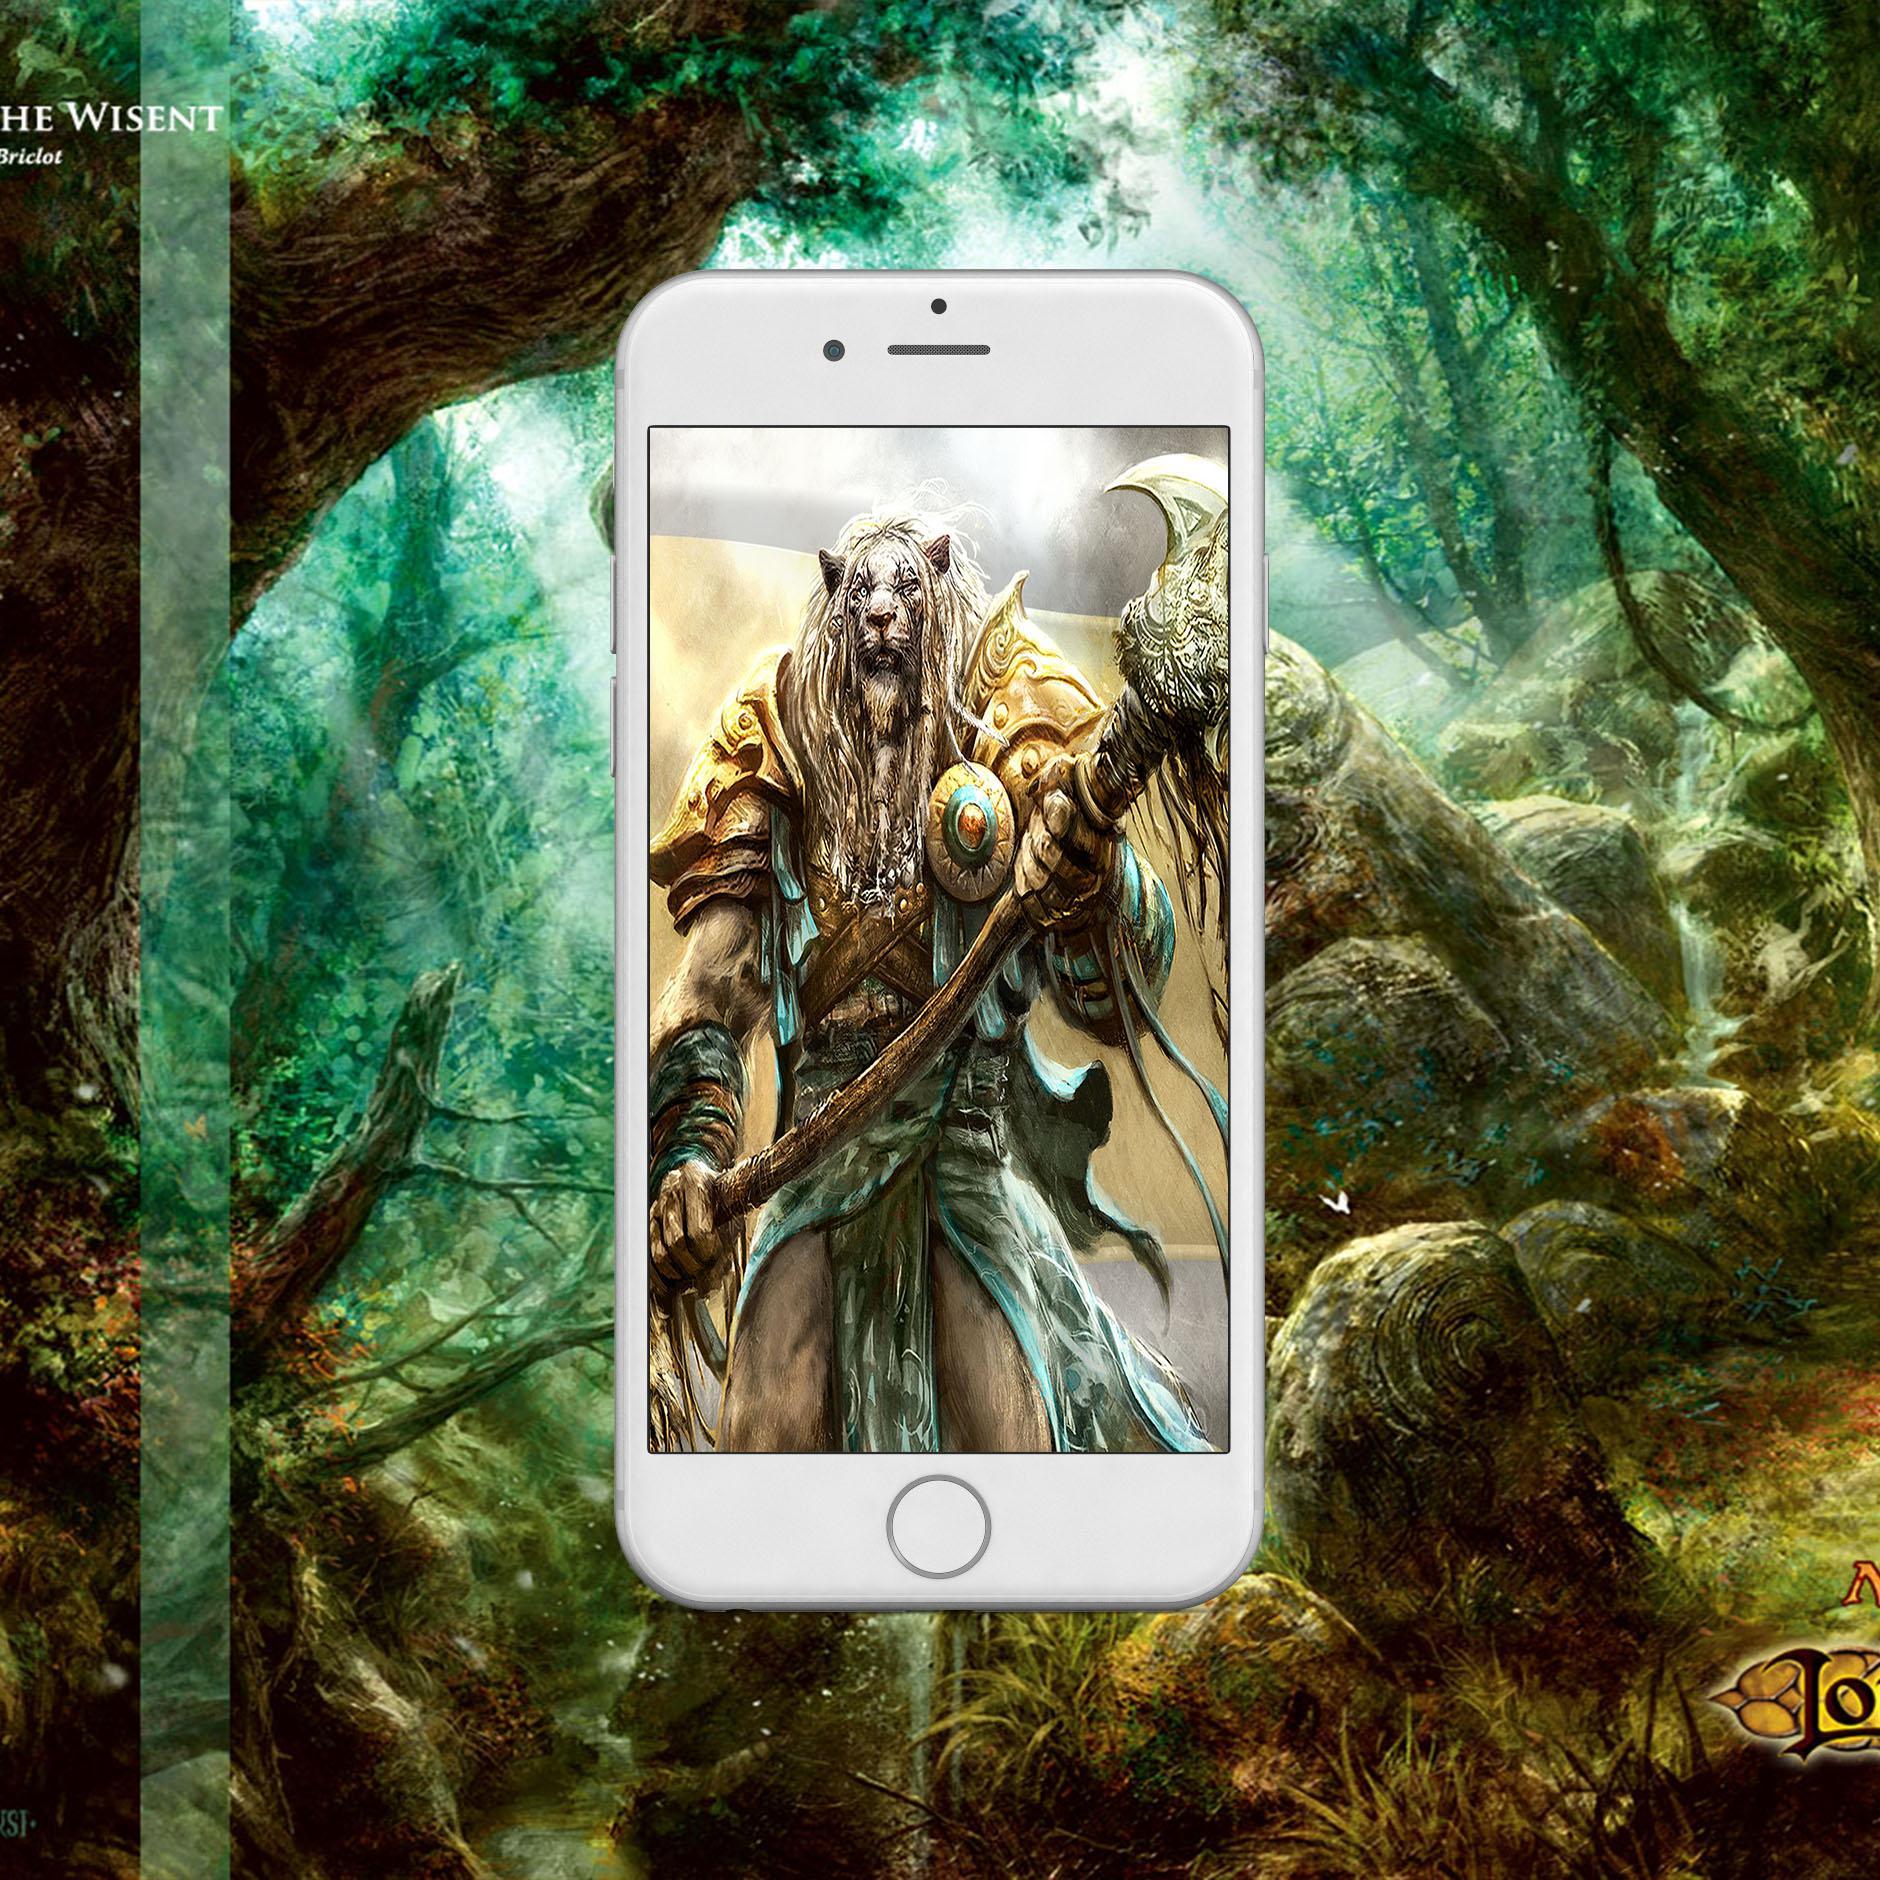 Mtg Wallpaper Hd For Android Apk Download